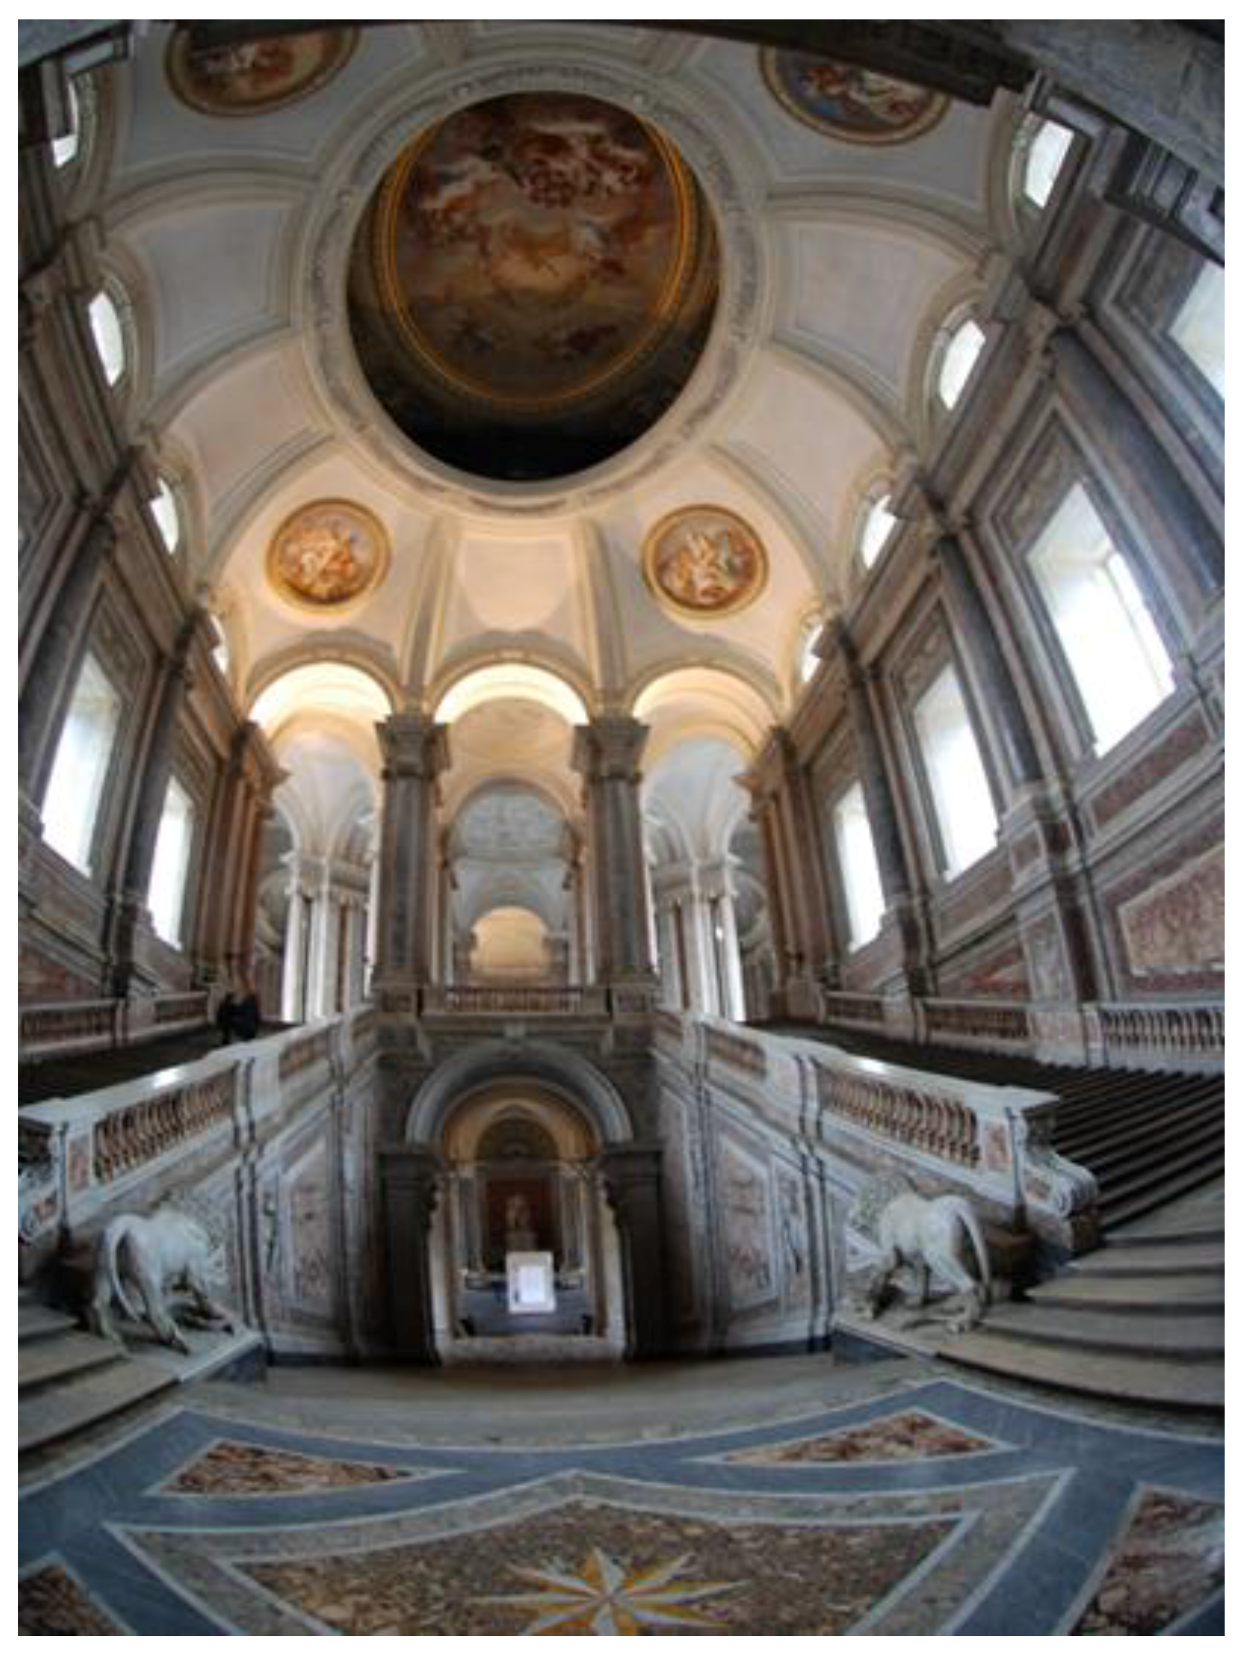 Buildings | Free Full-Text | The Acoustics of the Double Elliptical Vault  of the Royal Palace of Caserta (Italy)